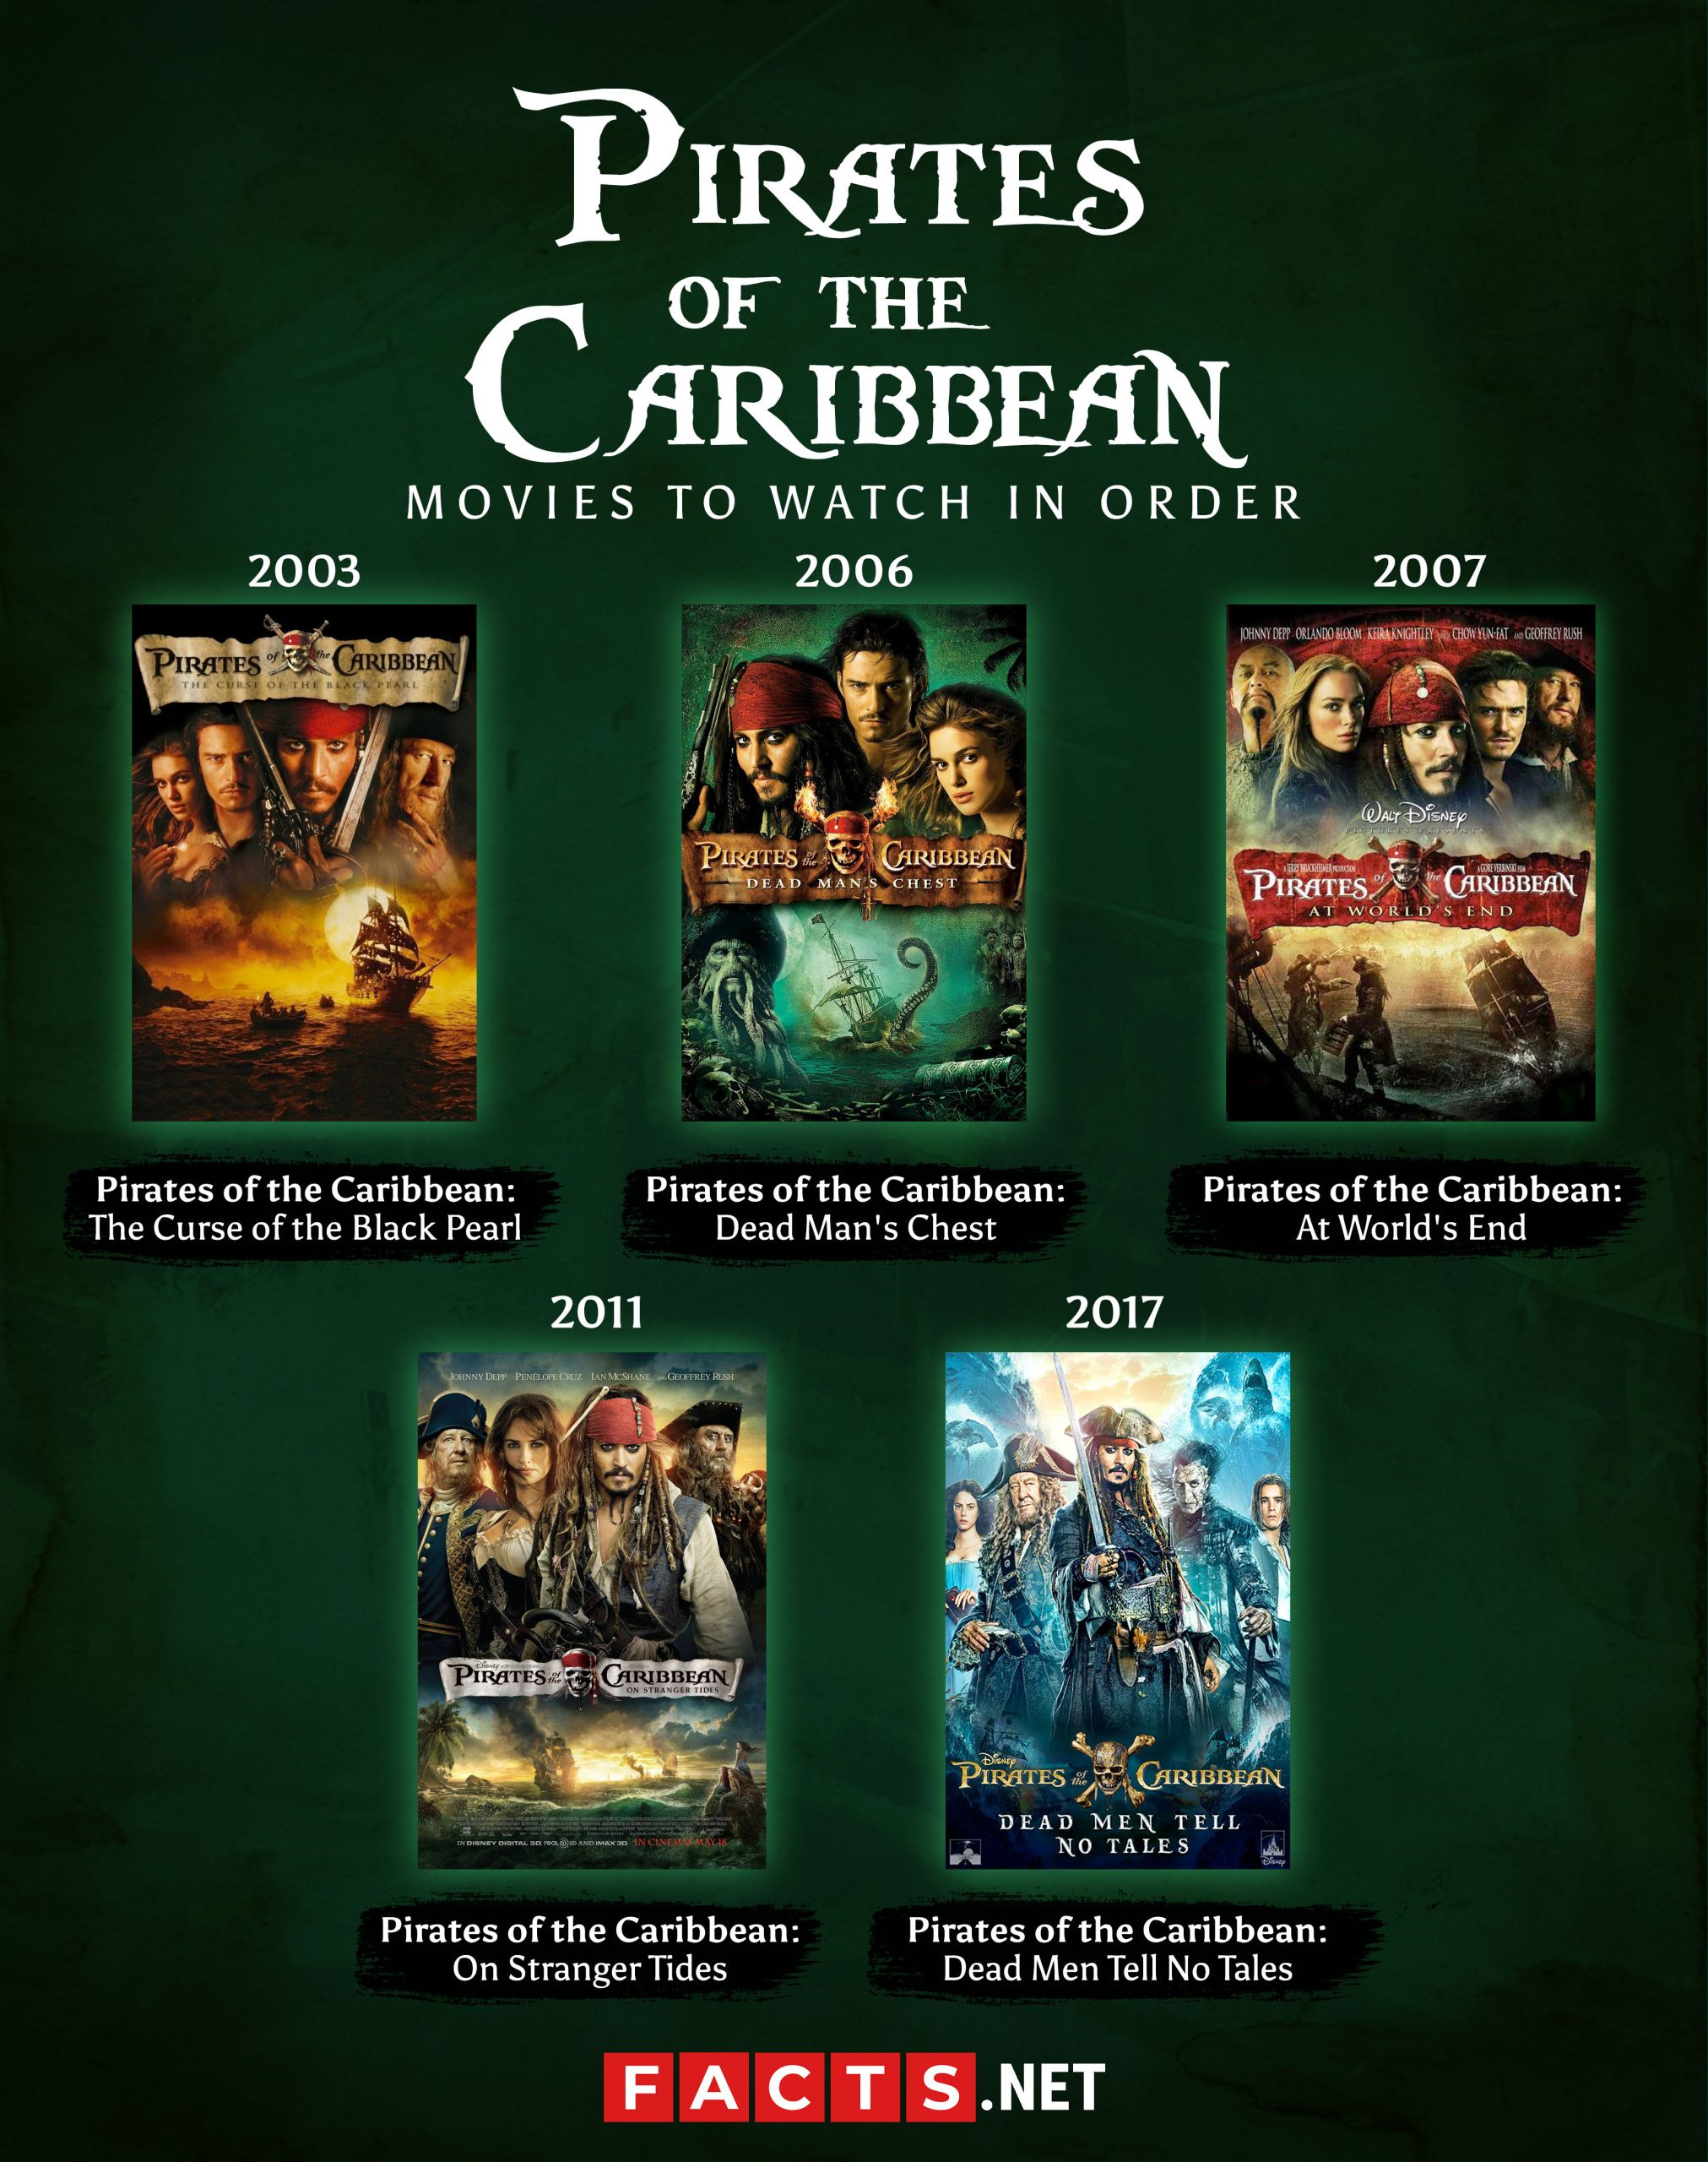 how to watch the pirates of the caribbean movies in order